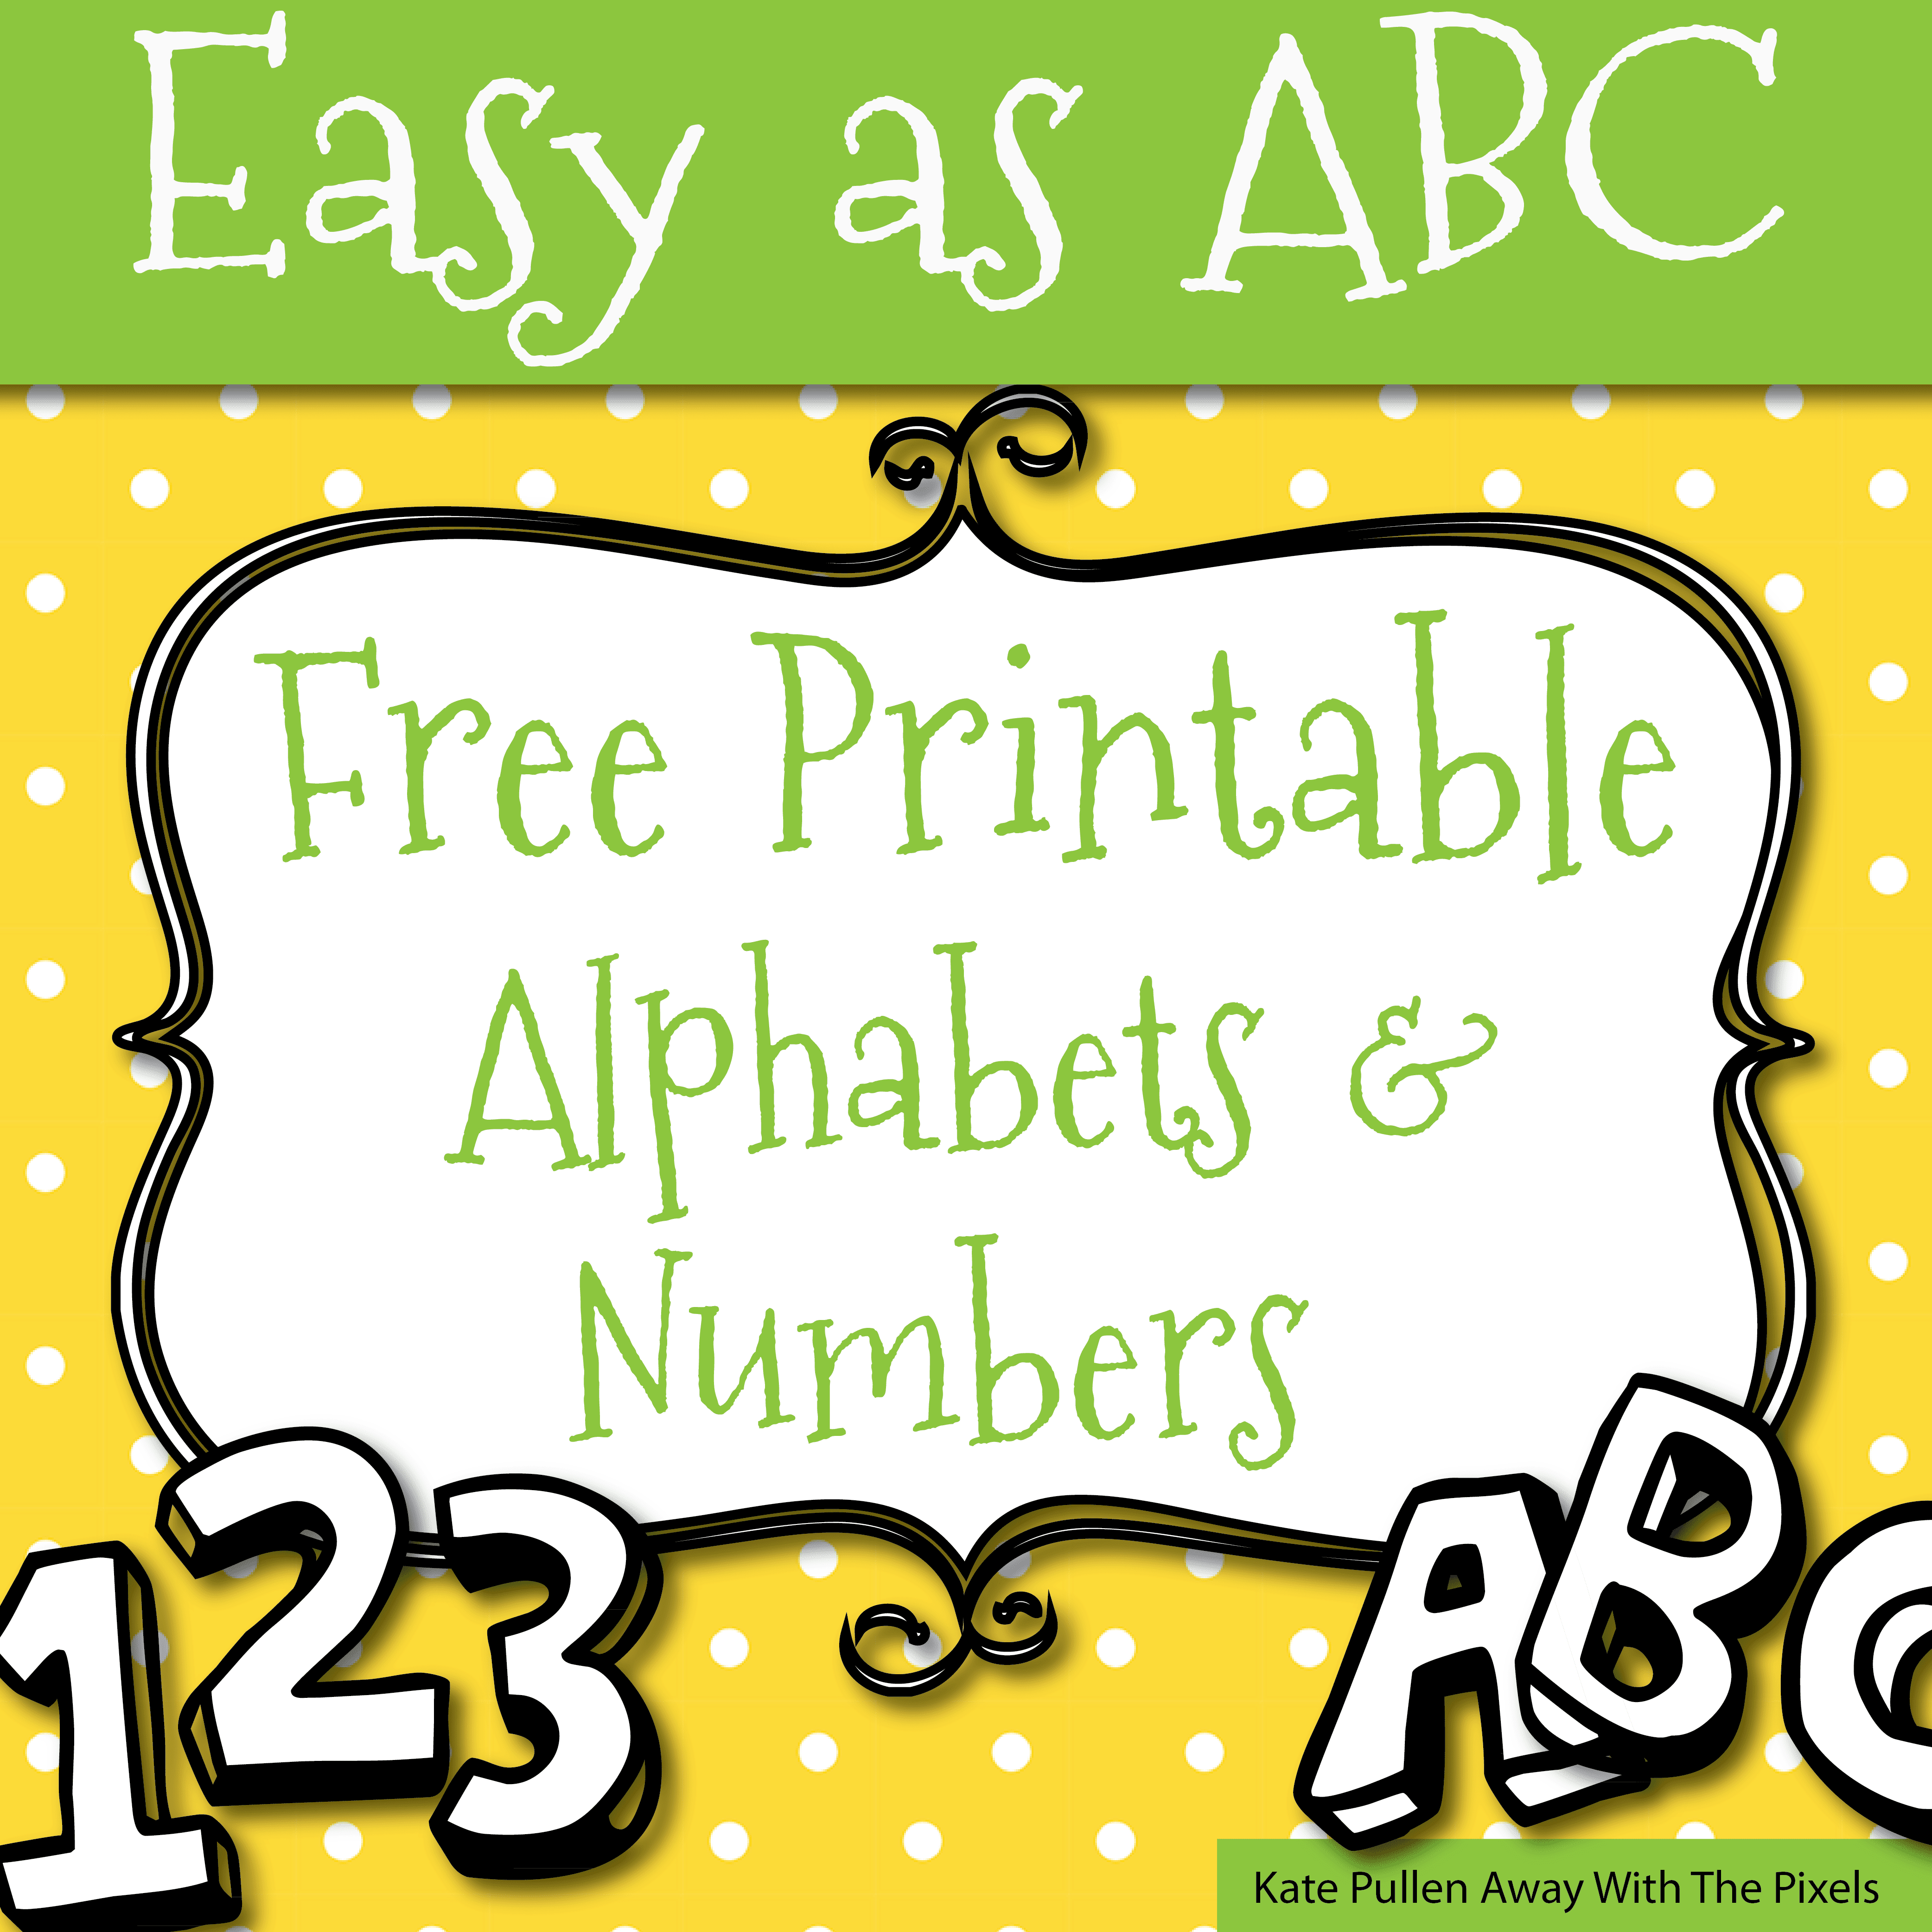 Free Printable Letters And Numbers For Crafts - Printable Alphabet Letters Free Download